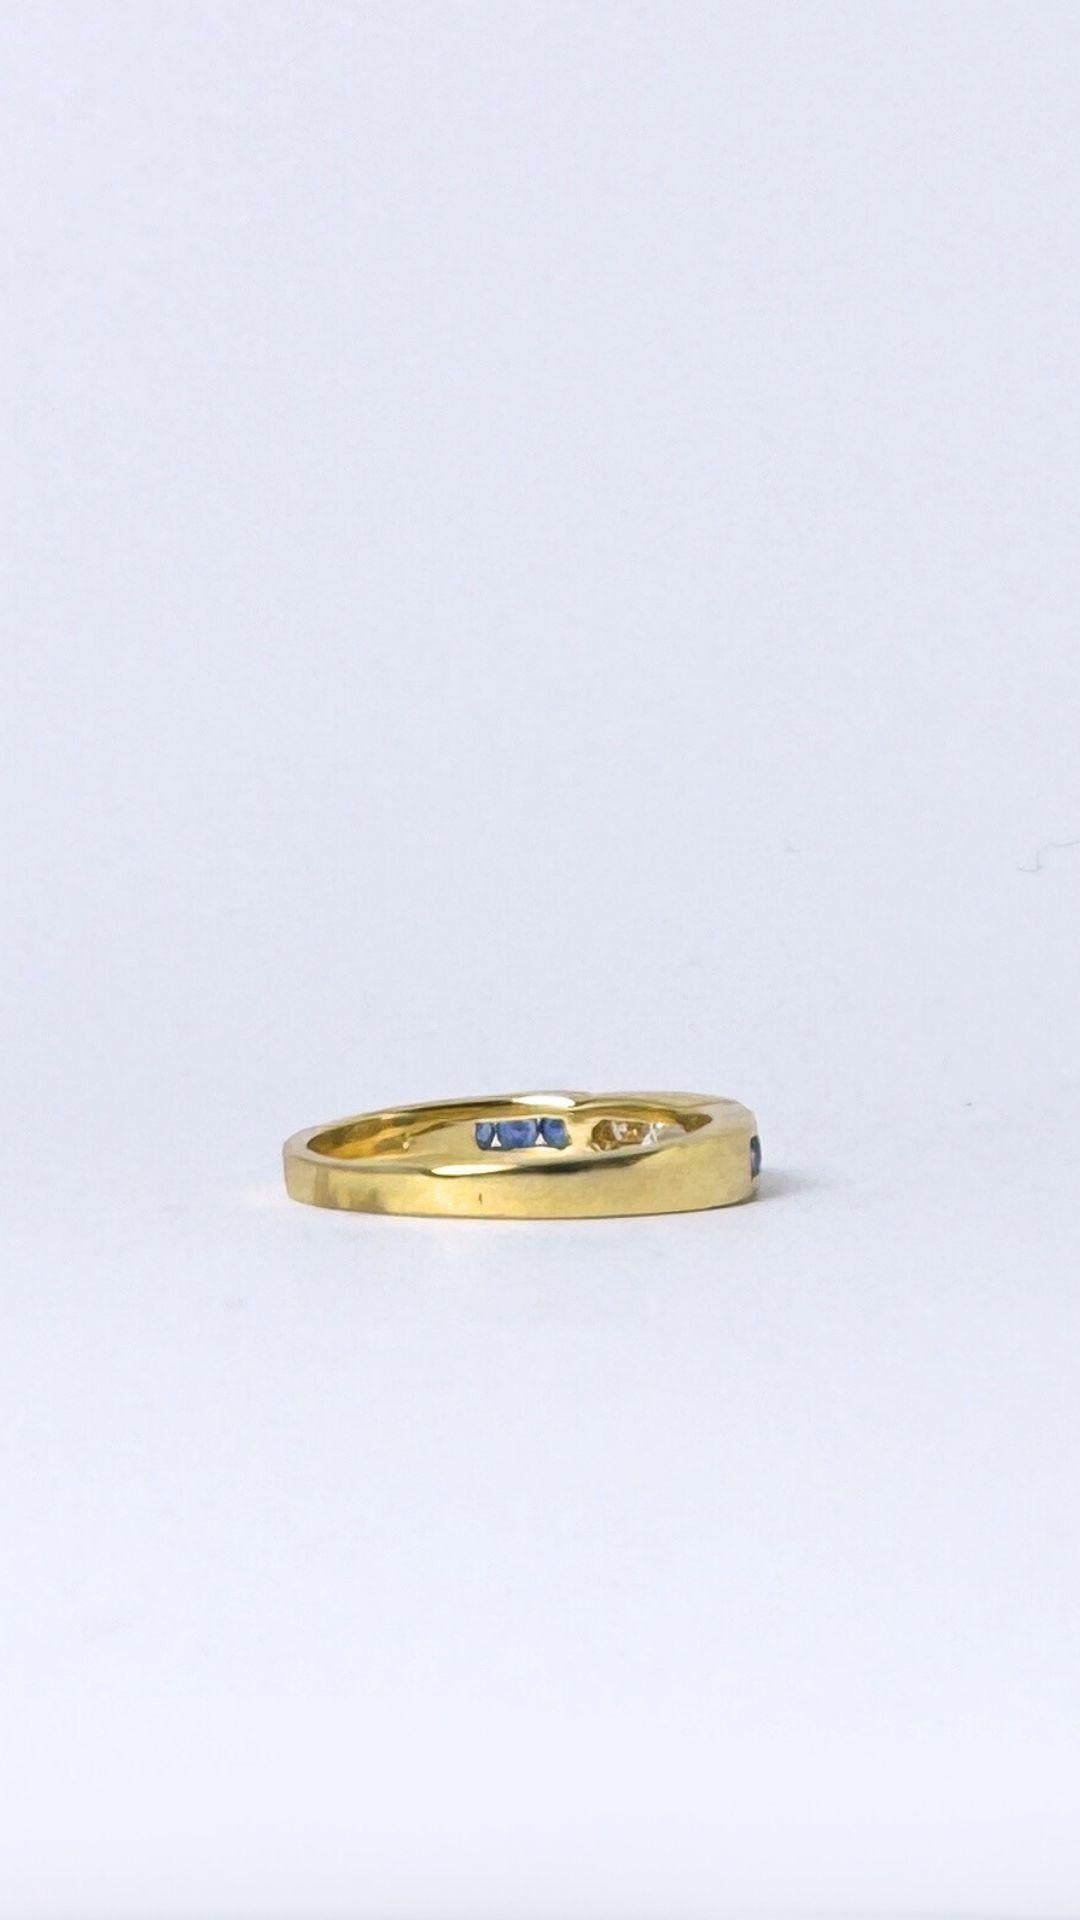 European vintage ring 14 carat yellow gold with diamonds and blue sapphires For Sale 1